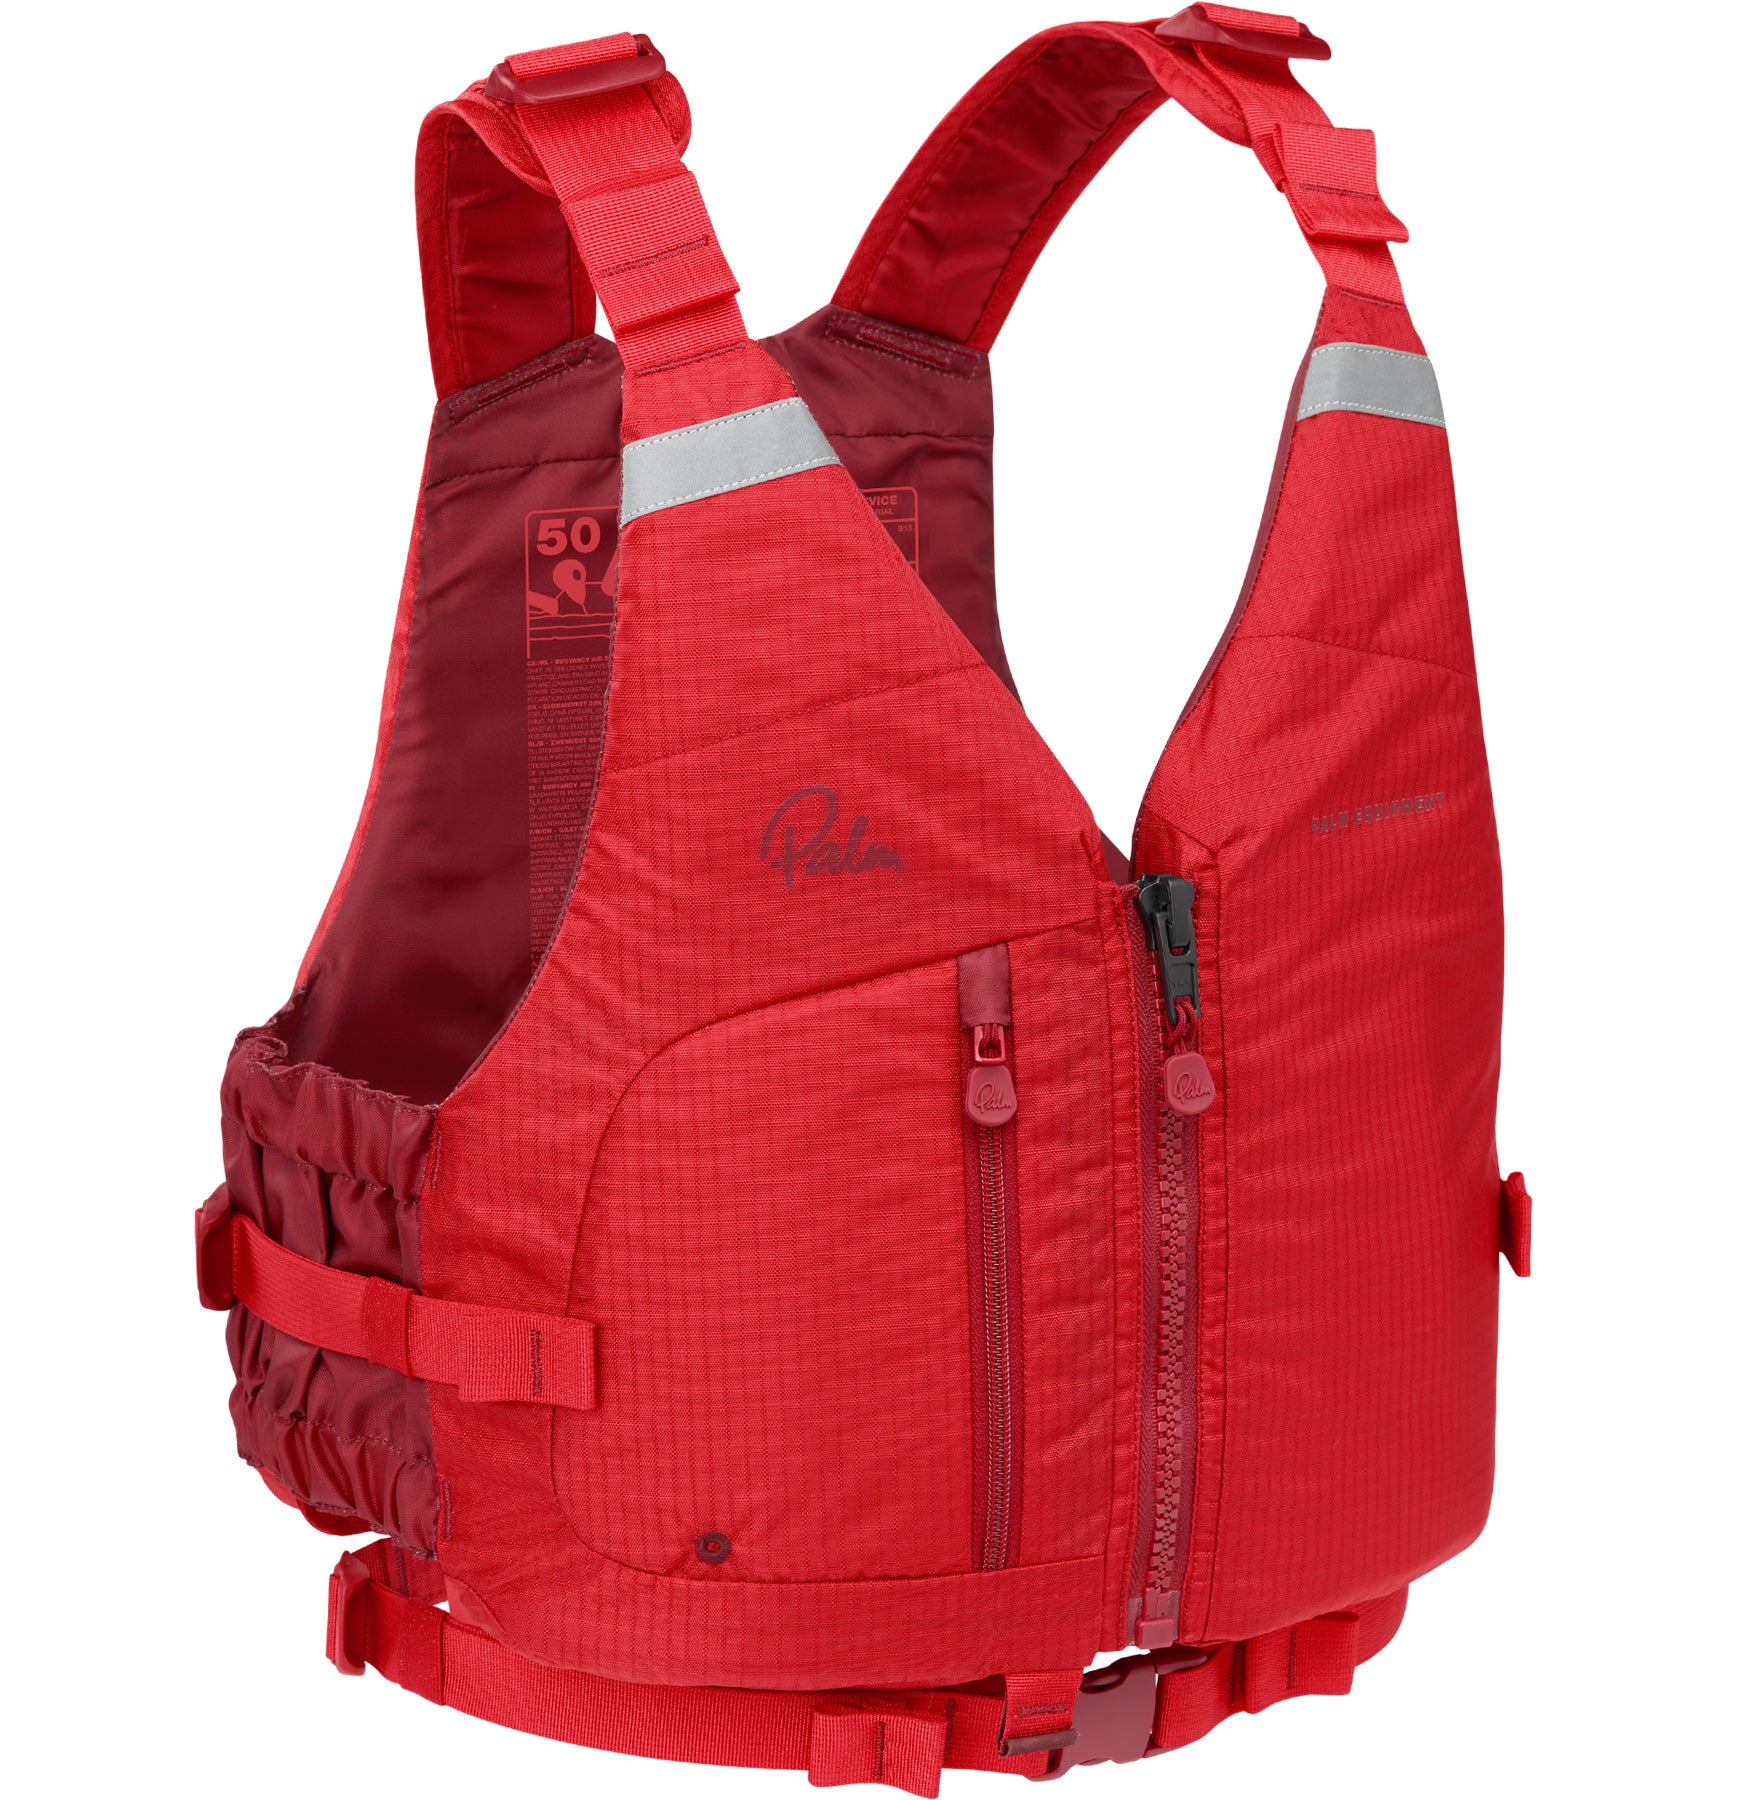 Palm Meander buoyancy aid in flame red